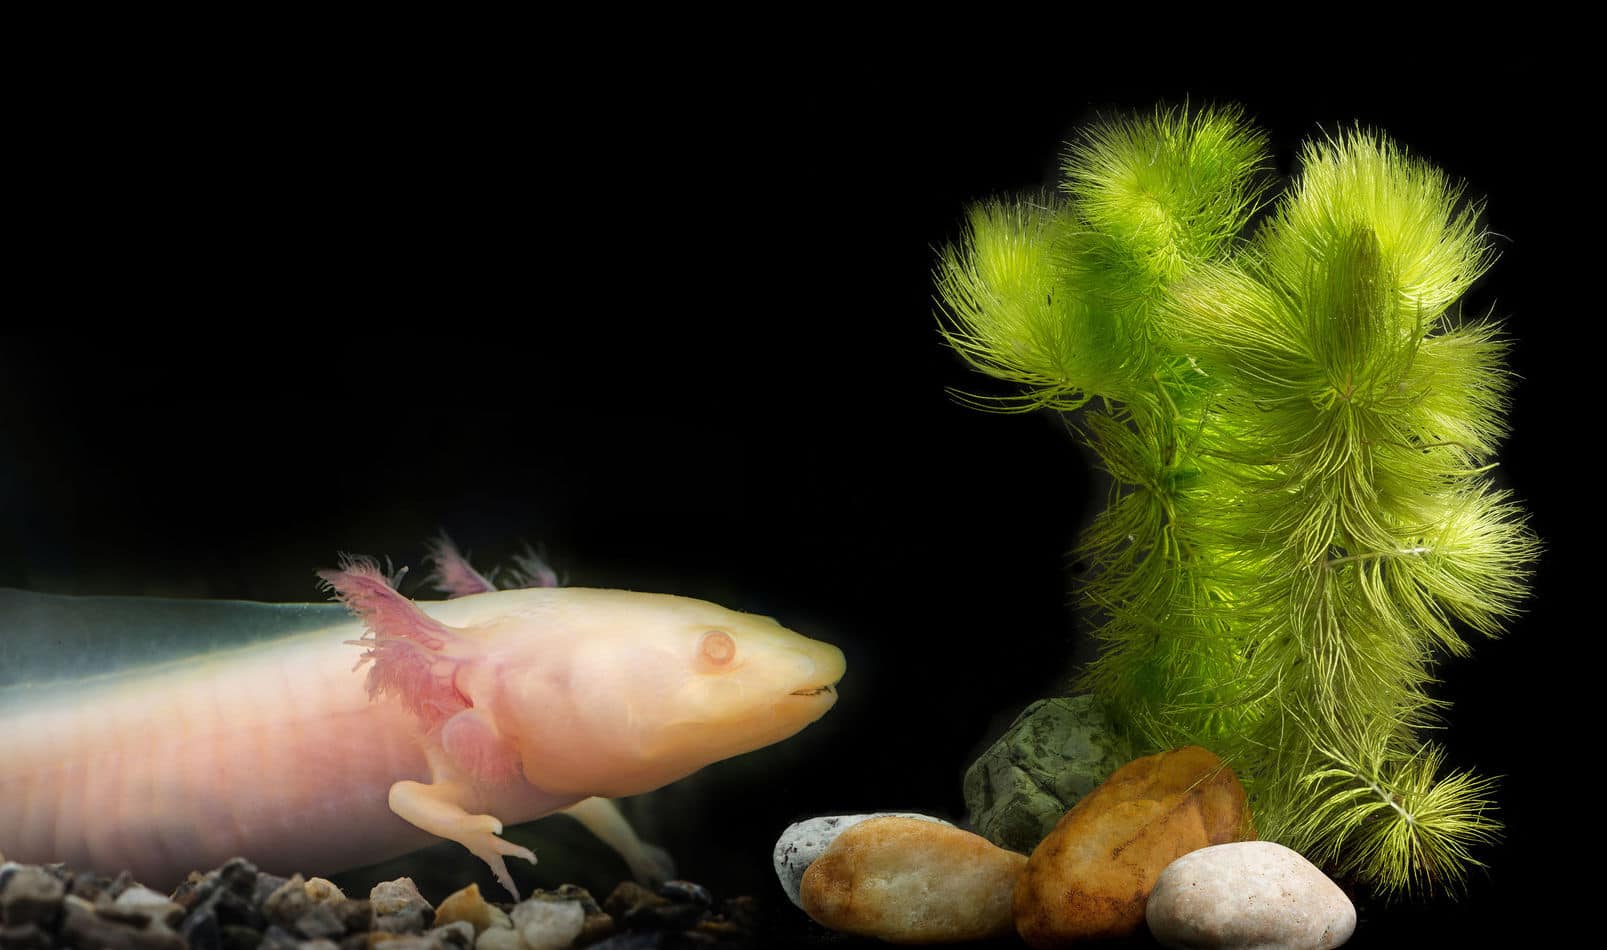 GFP Axolotl: A Beginner’s Guide with Pics, Cost to Buy, and Care Info